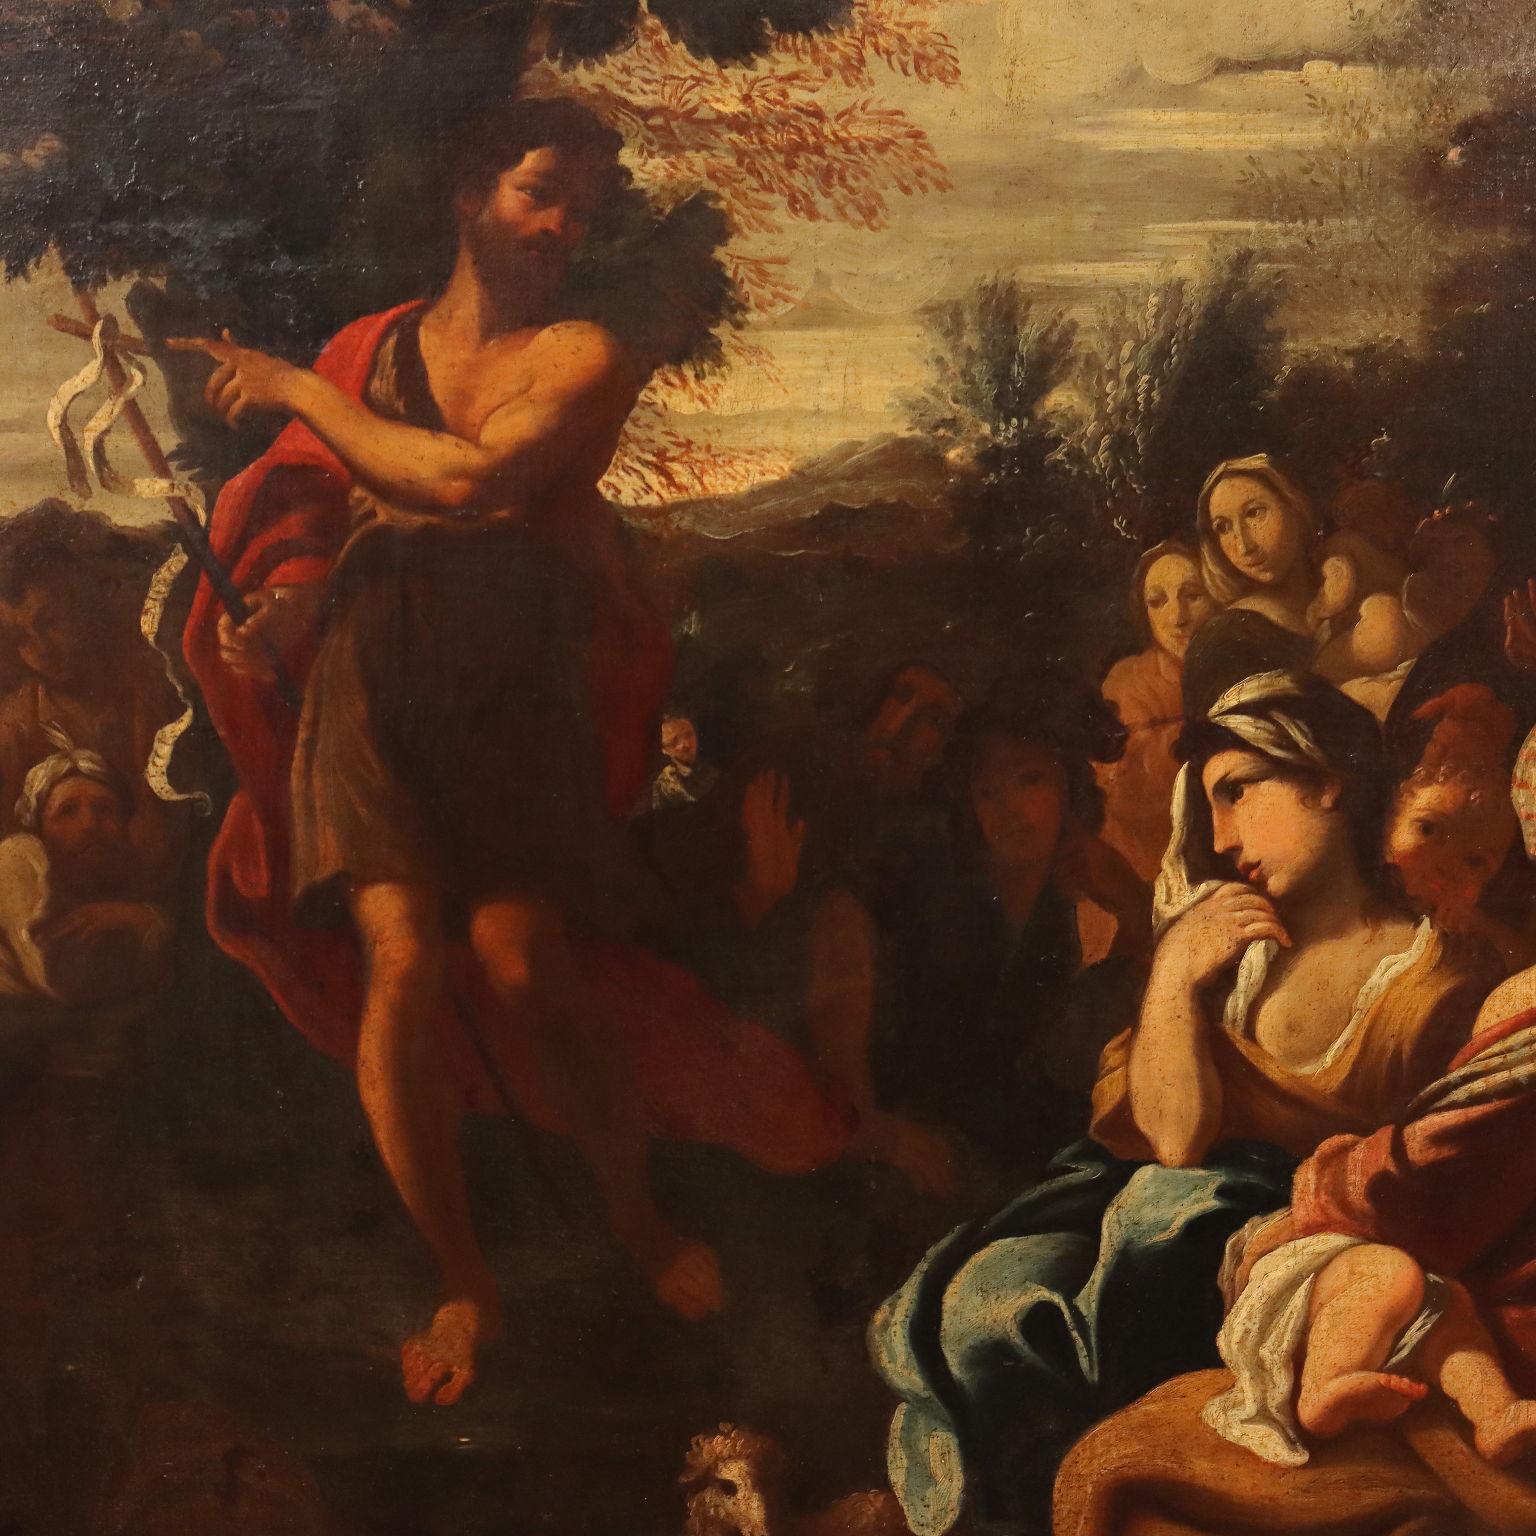 Unknown Figurative Painting - Painting The Preaching of St. John the Baptist, 17th-18th century